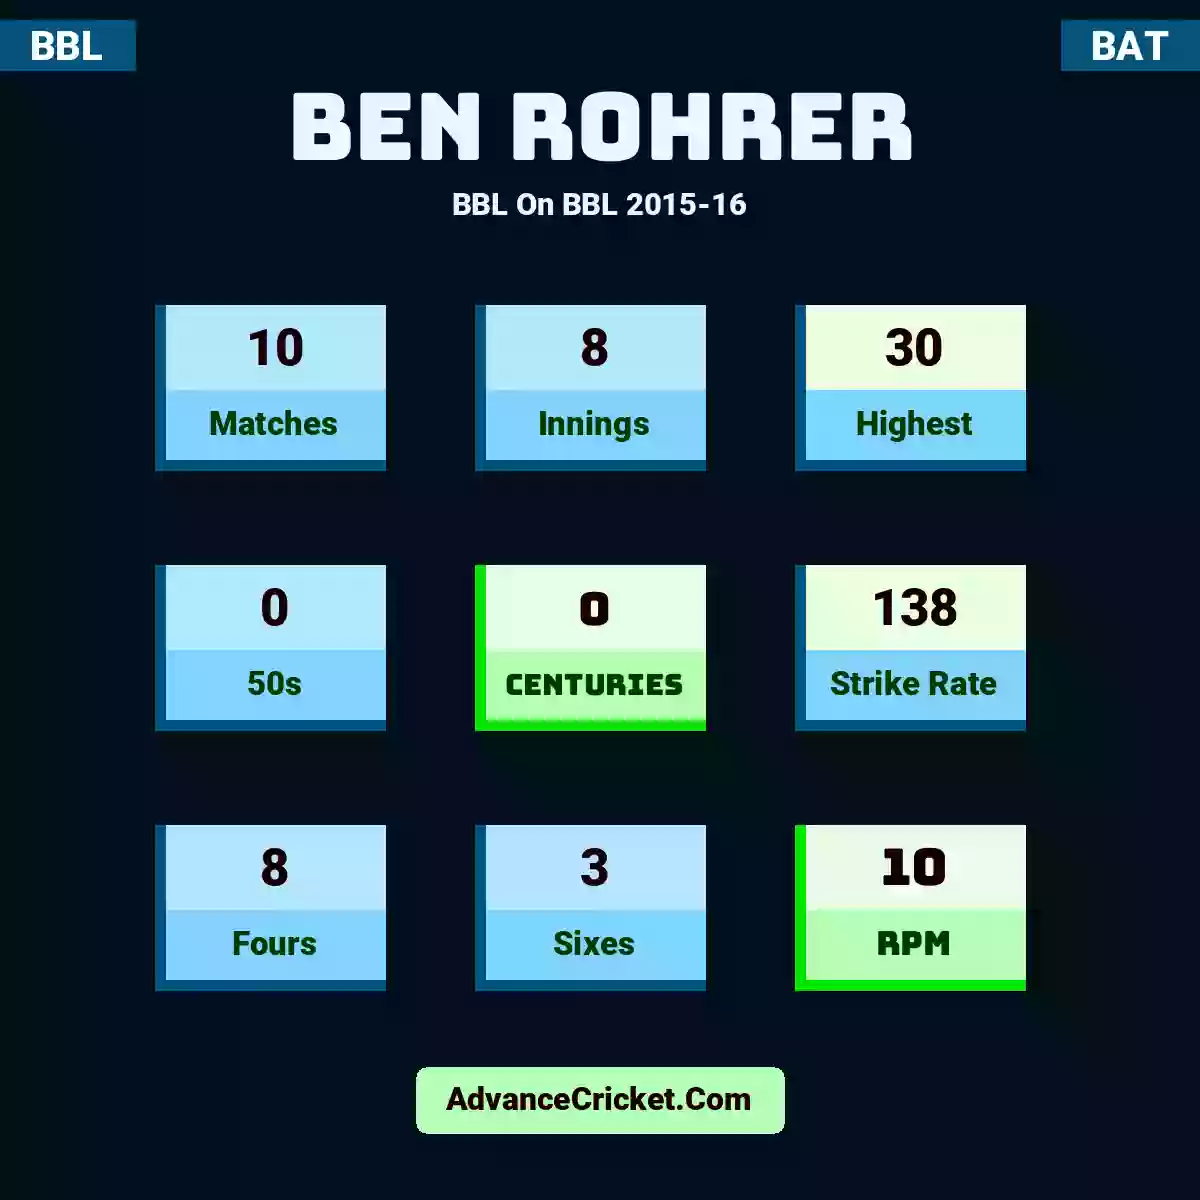 Ben Rohrer BBL  On BBL 2015-16, Ben Rohrer played 10 matches, scored 30 runs as highest, 0 half-centuries, and 0 centuries, with a strike rate of 138. B.Rohrer hit 8 fours and 3 sixes, with an RPM of 10.